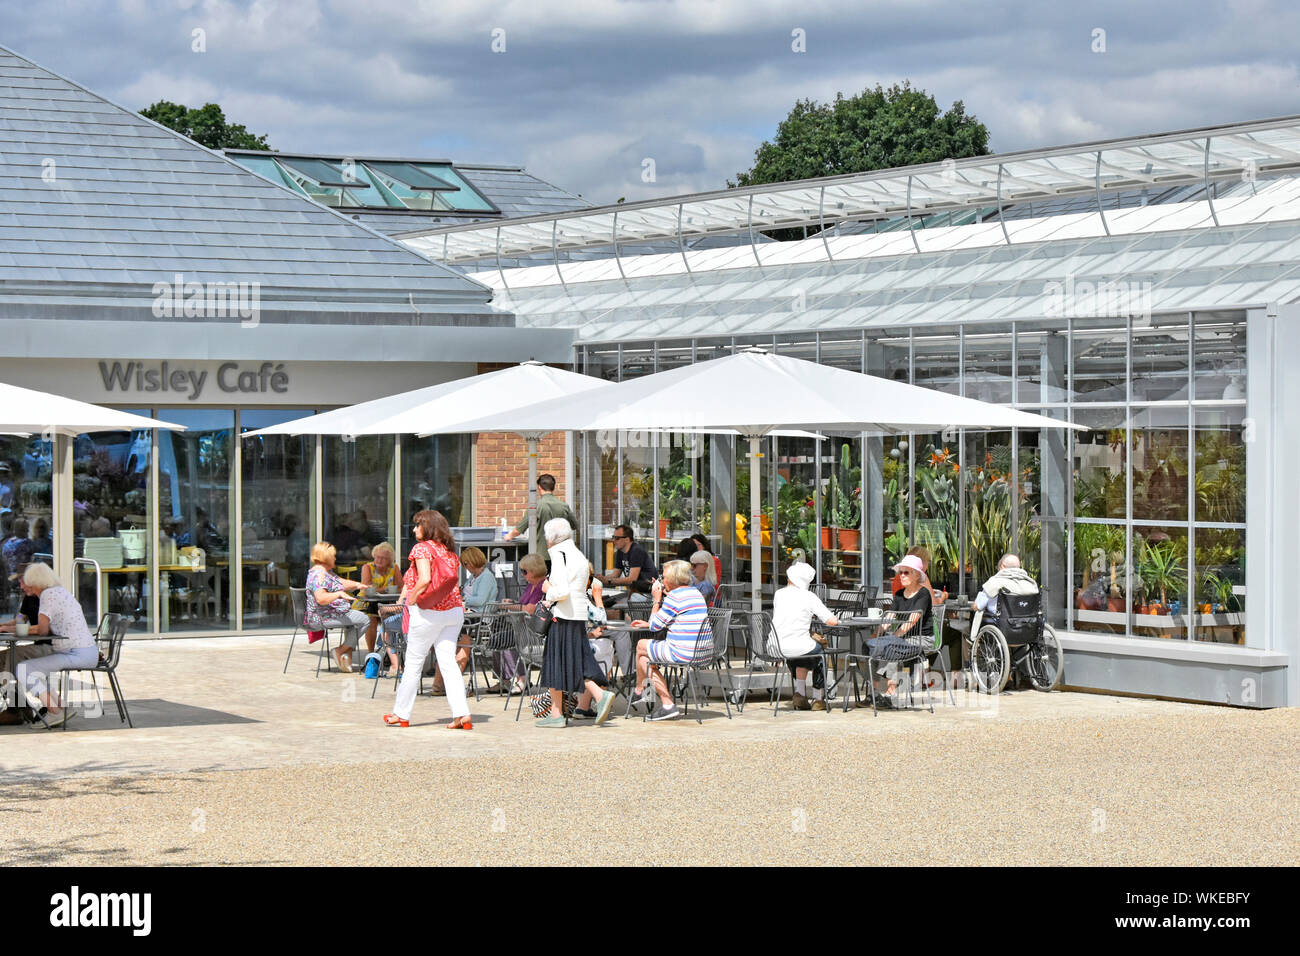 RHS Wisley people at new modern cafe building parasol shade & outdoor tables next to plant shop Royal Horticultural Society Gardens Surrey England UK Stock Photo